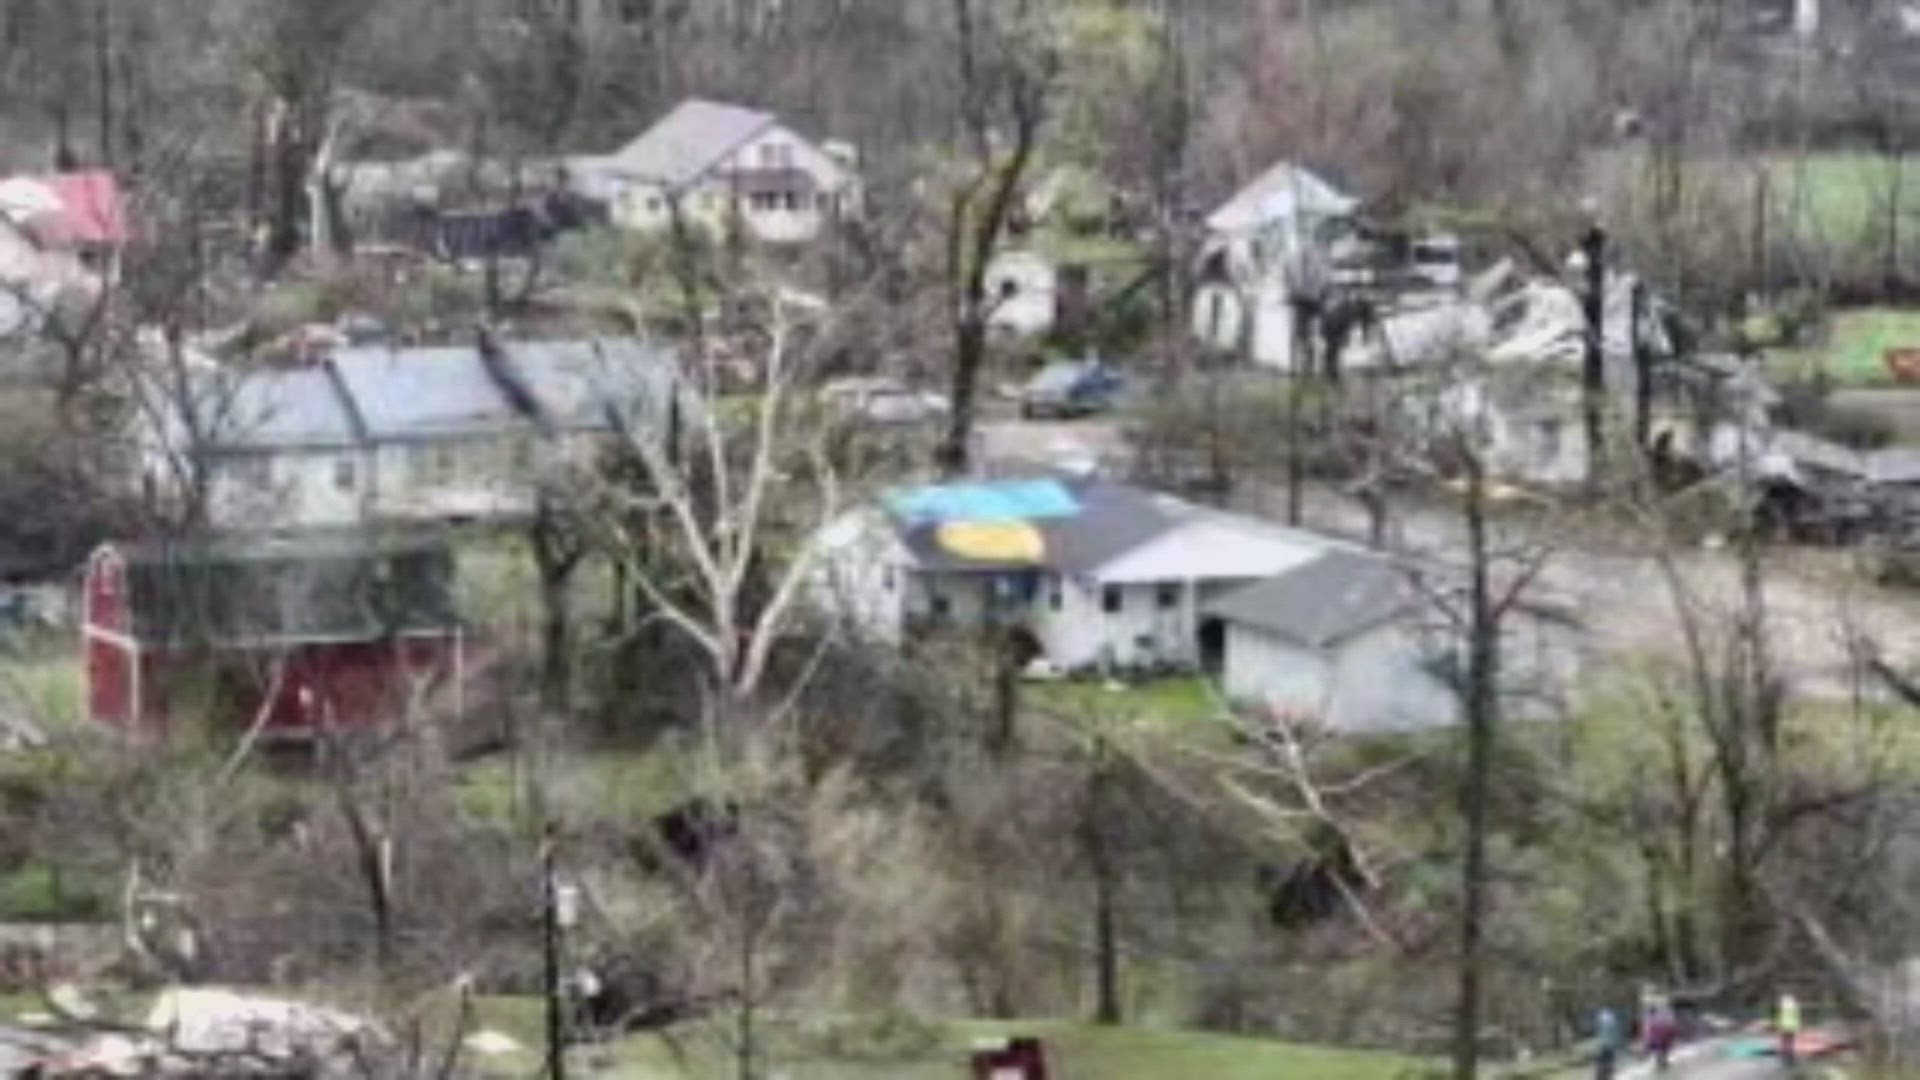 An Ef-2 tornado ripped through southeast Missouri on Wednesday. Five people were killed, and several others were injured.